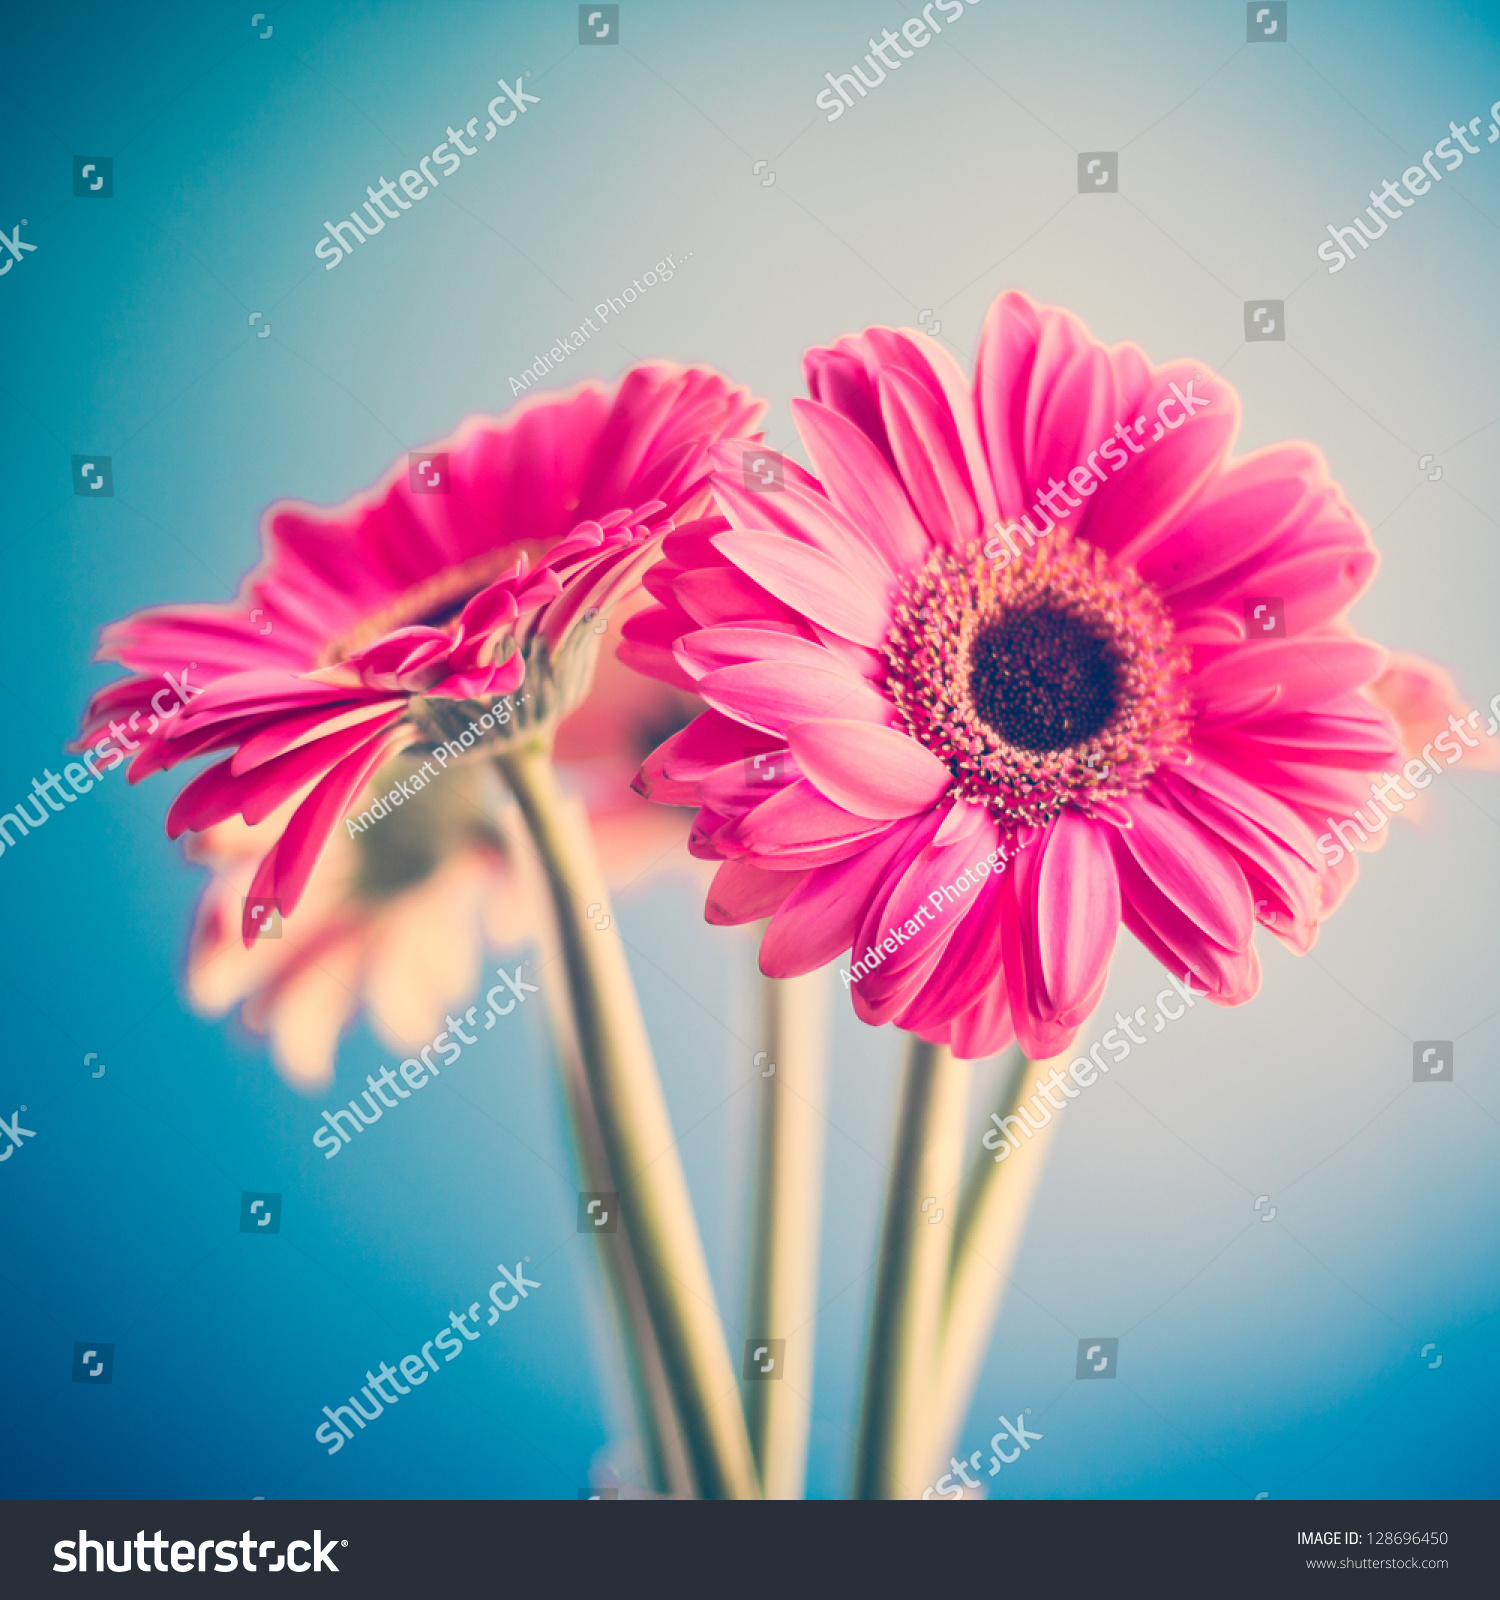 Two Pink Flowers Stock Photo (Royalty Free) 128696450 - Shutterstock